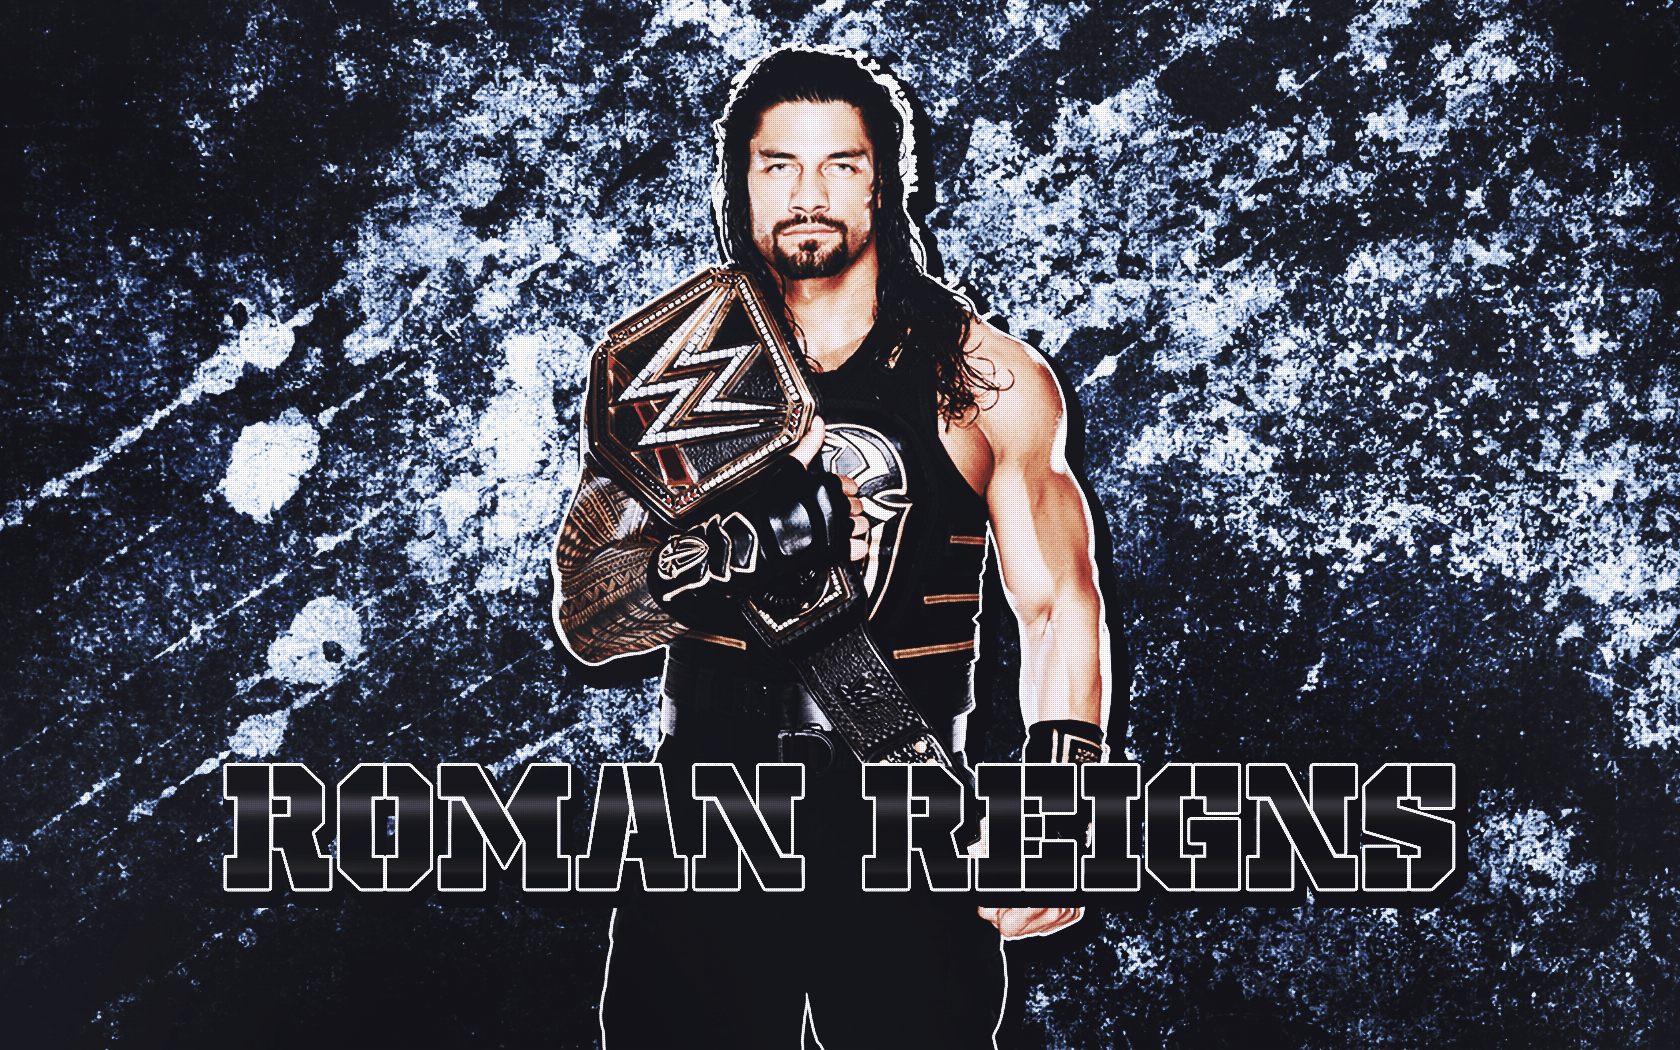 Roman Reigns Wallpaper For iPhone